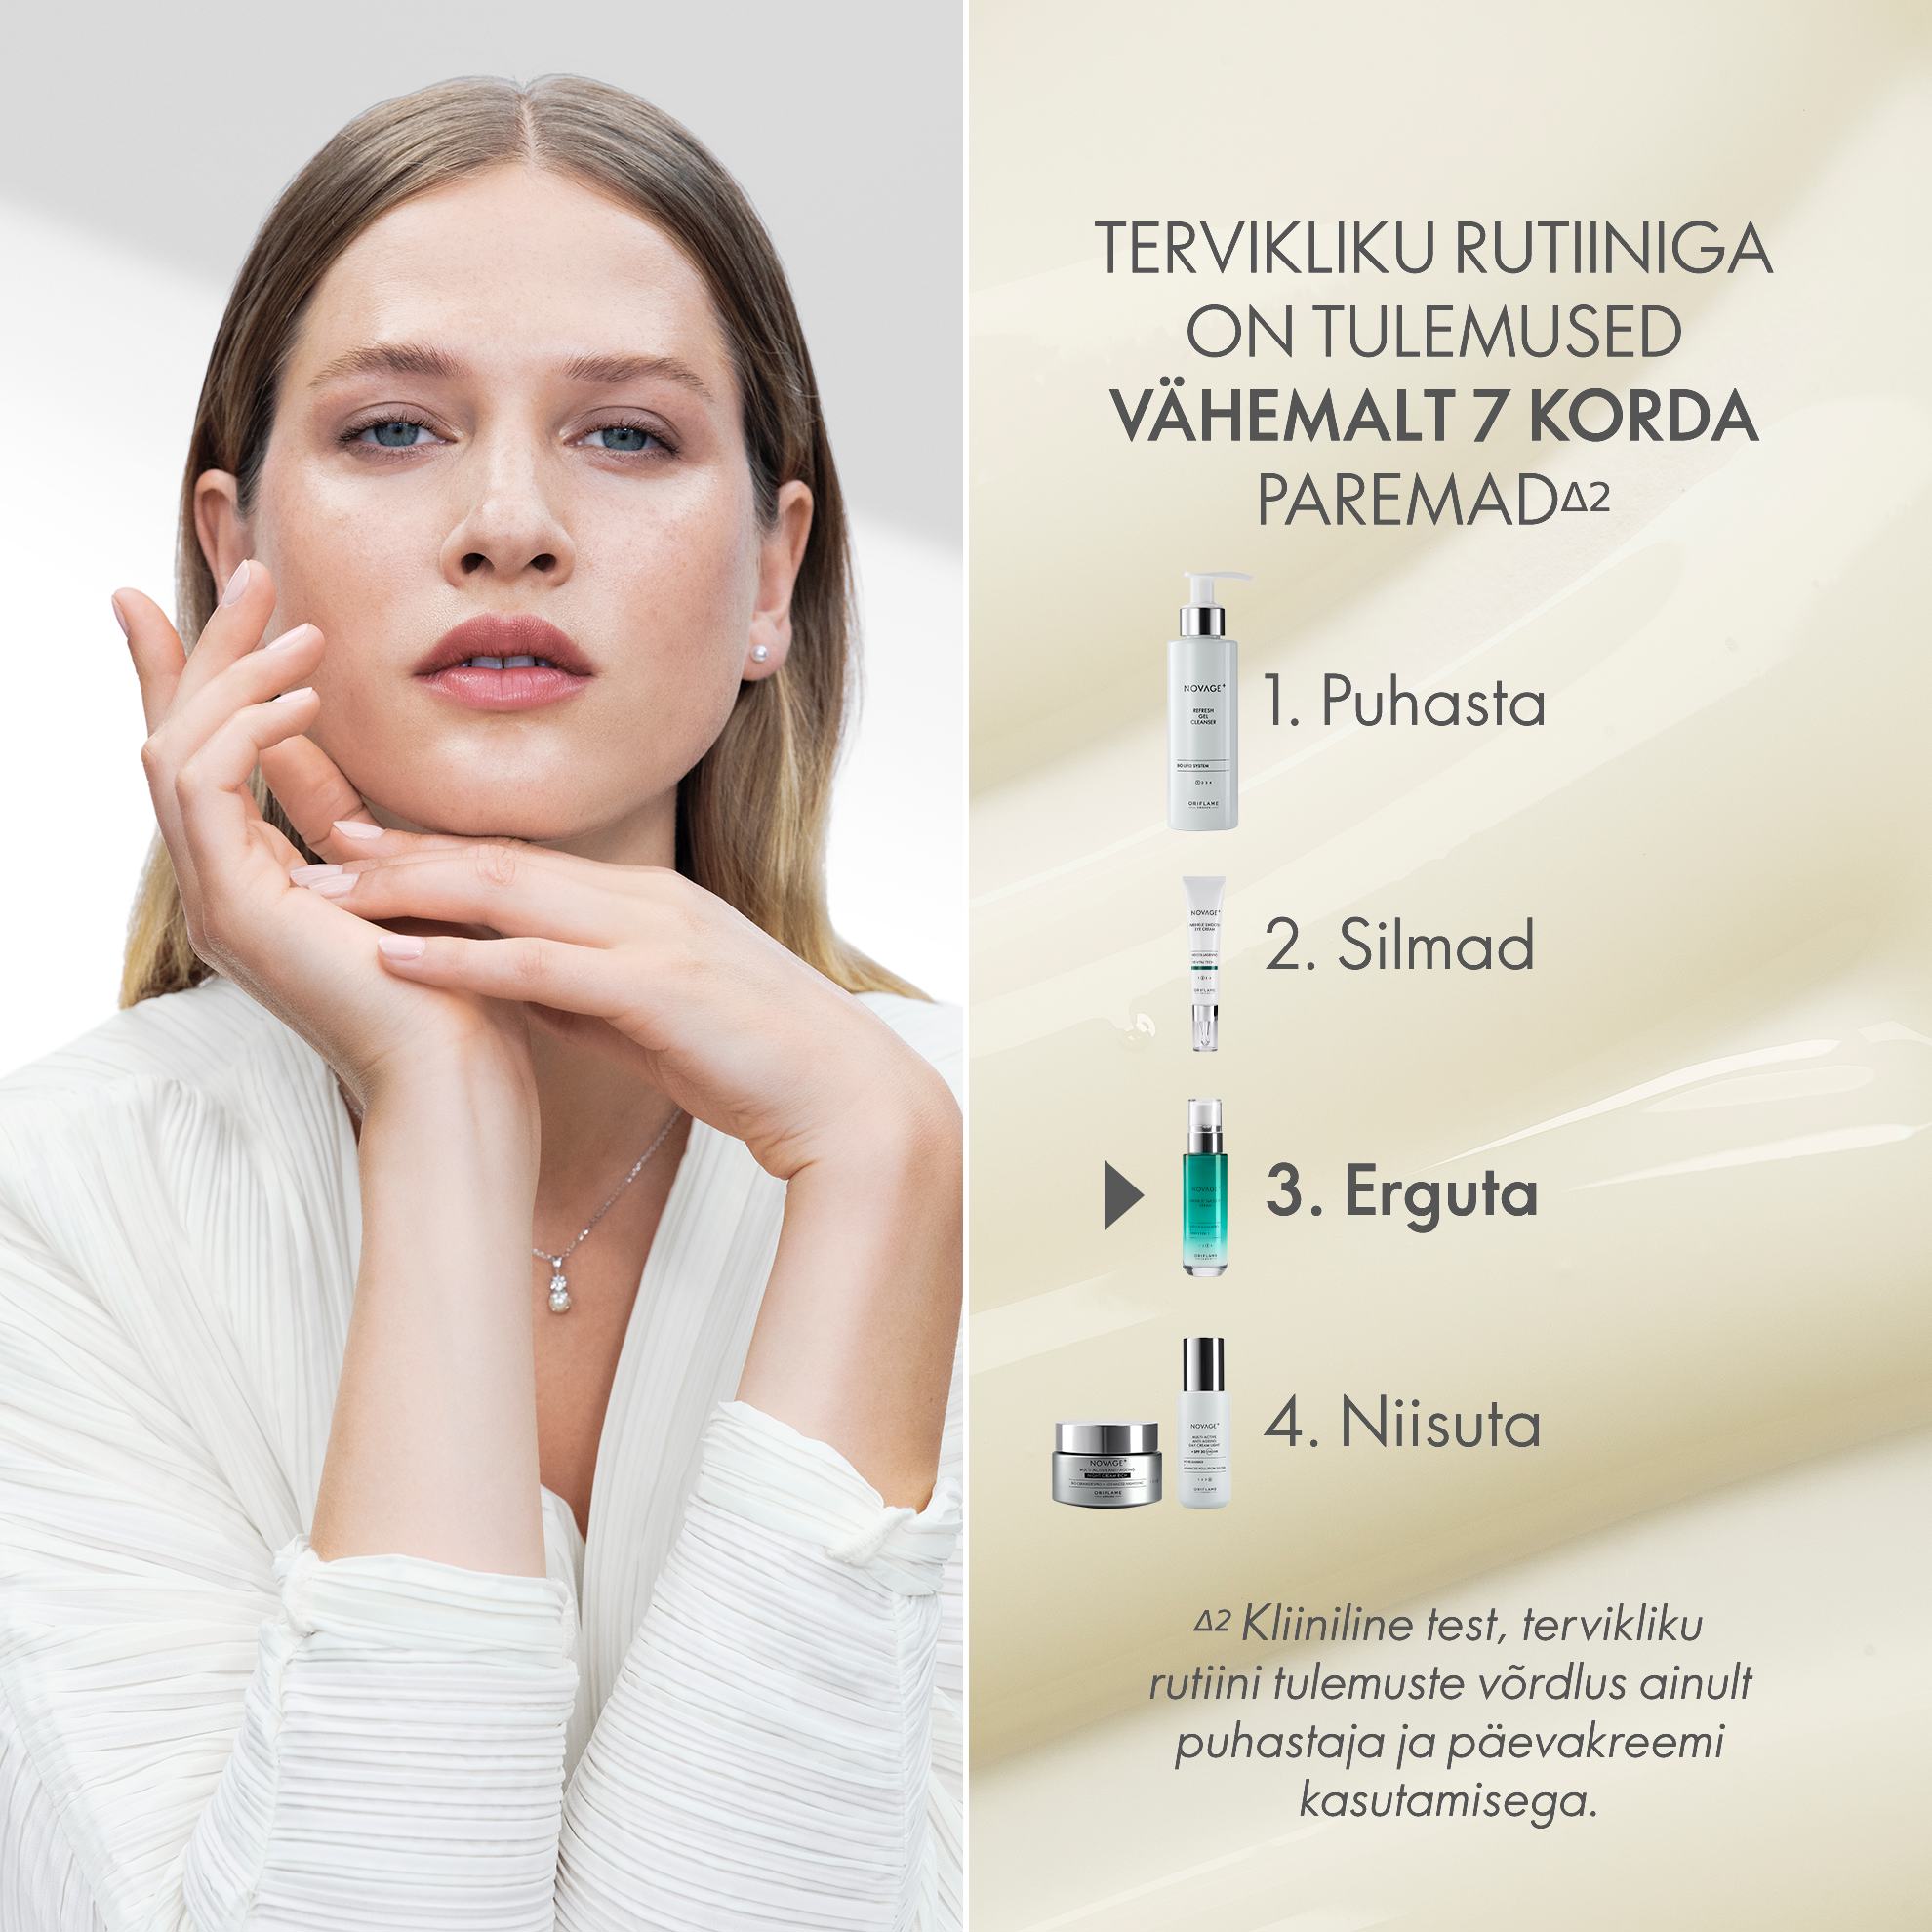 https://media-cdn.oriflame.com/productImage?externalMediaId=product-management-media%2fProducts%2f41035%2fEE%2f41035_4.png&id=17585676&version=1